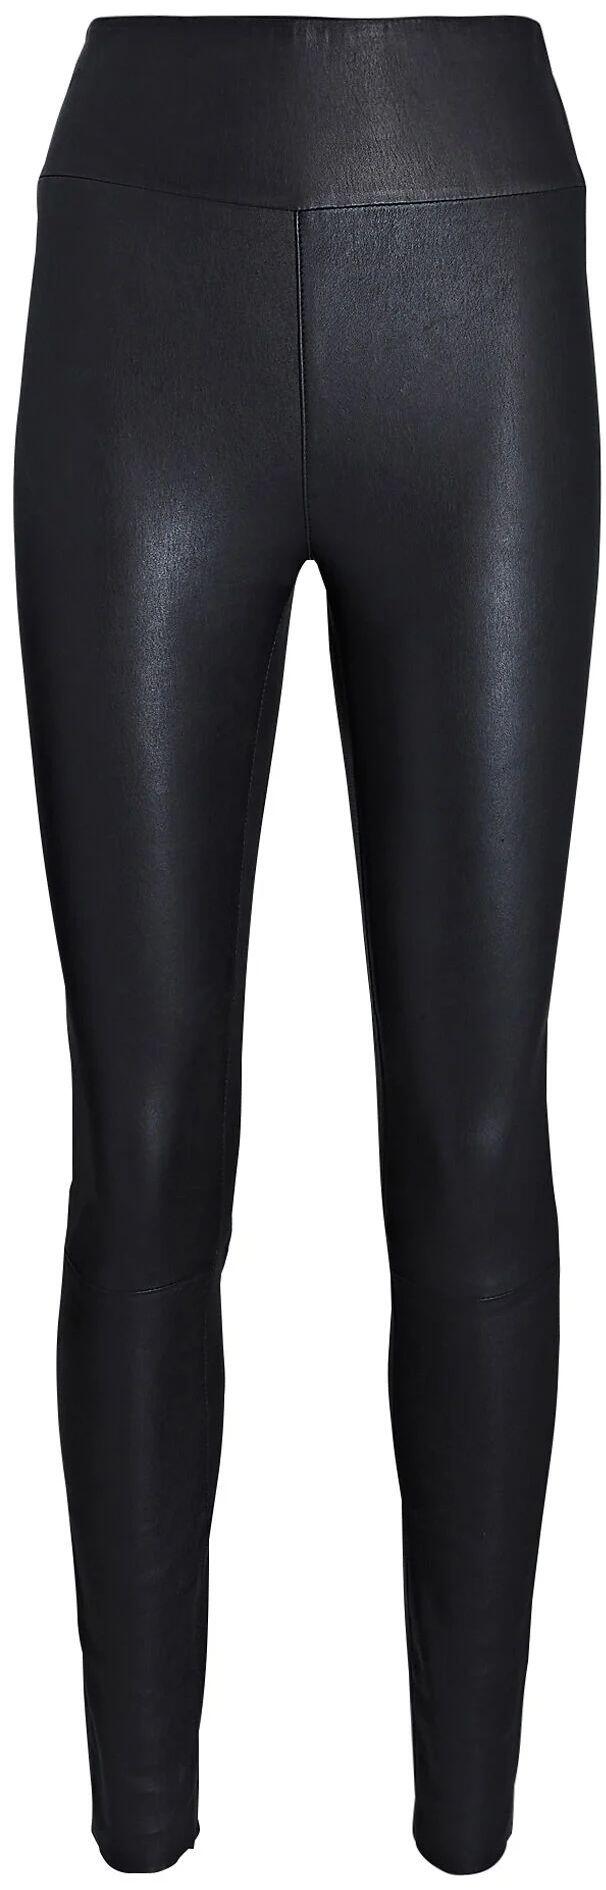 Leggings (Black Leather, Ankle) | style